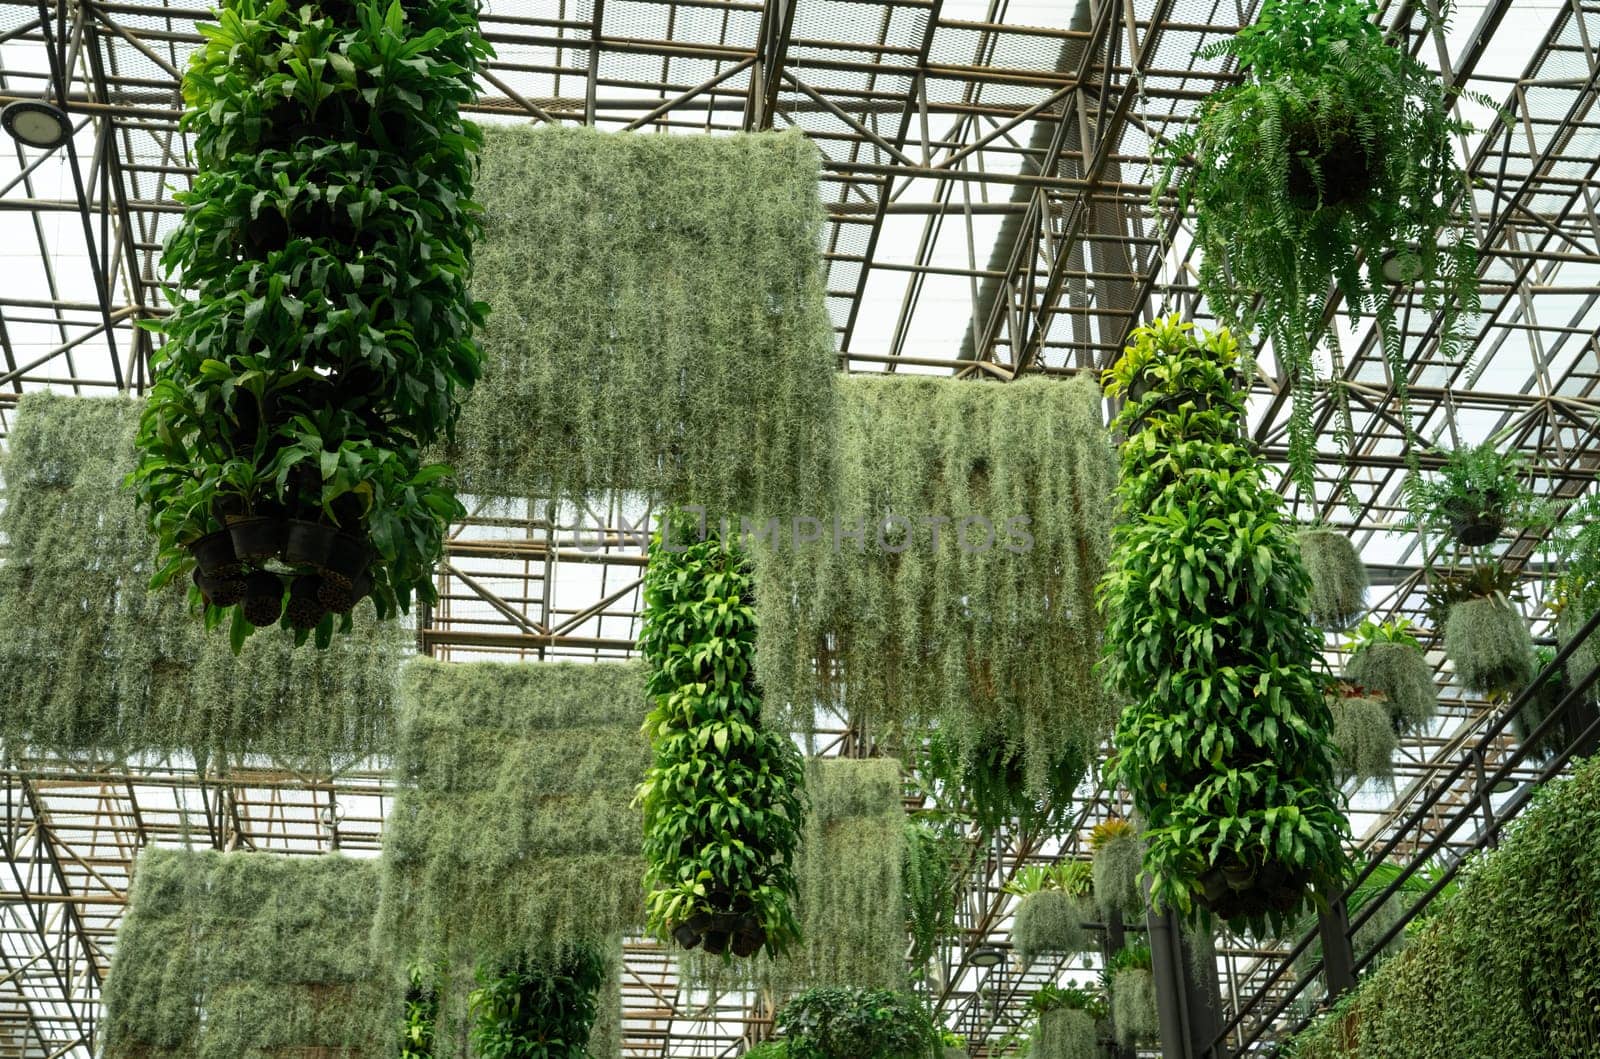 Green ornamental plant in hanging baskets. Plants in hanging pot decoration in charming garden. Care of hanging plant in baskets concept. Indoor hanging garden to reduce dust. Natural air purifier. by Fahroni